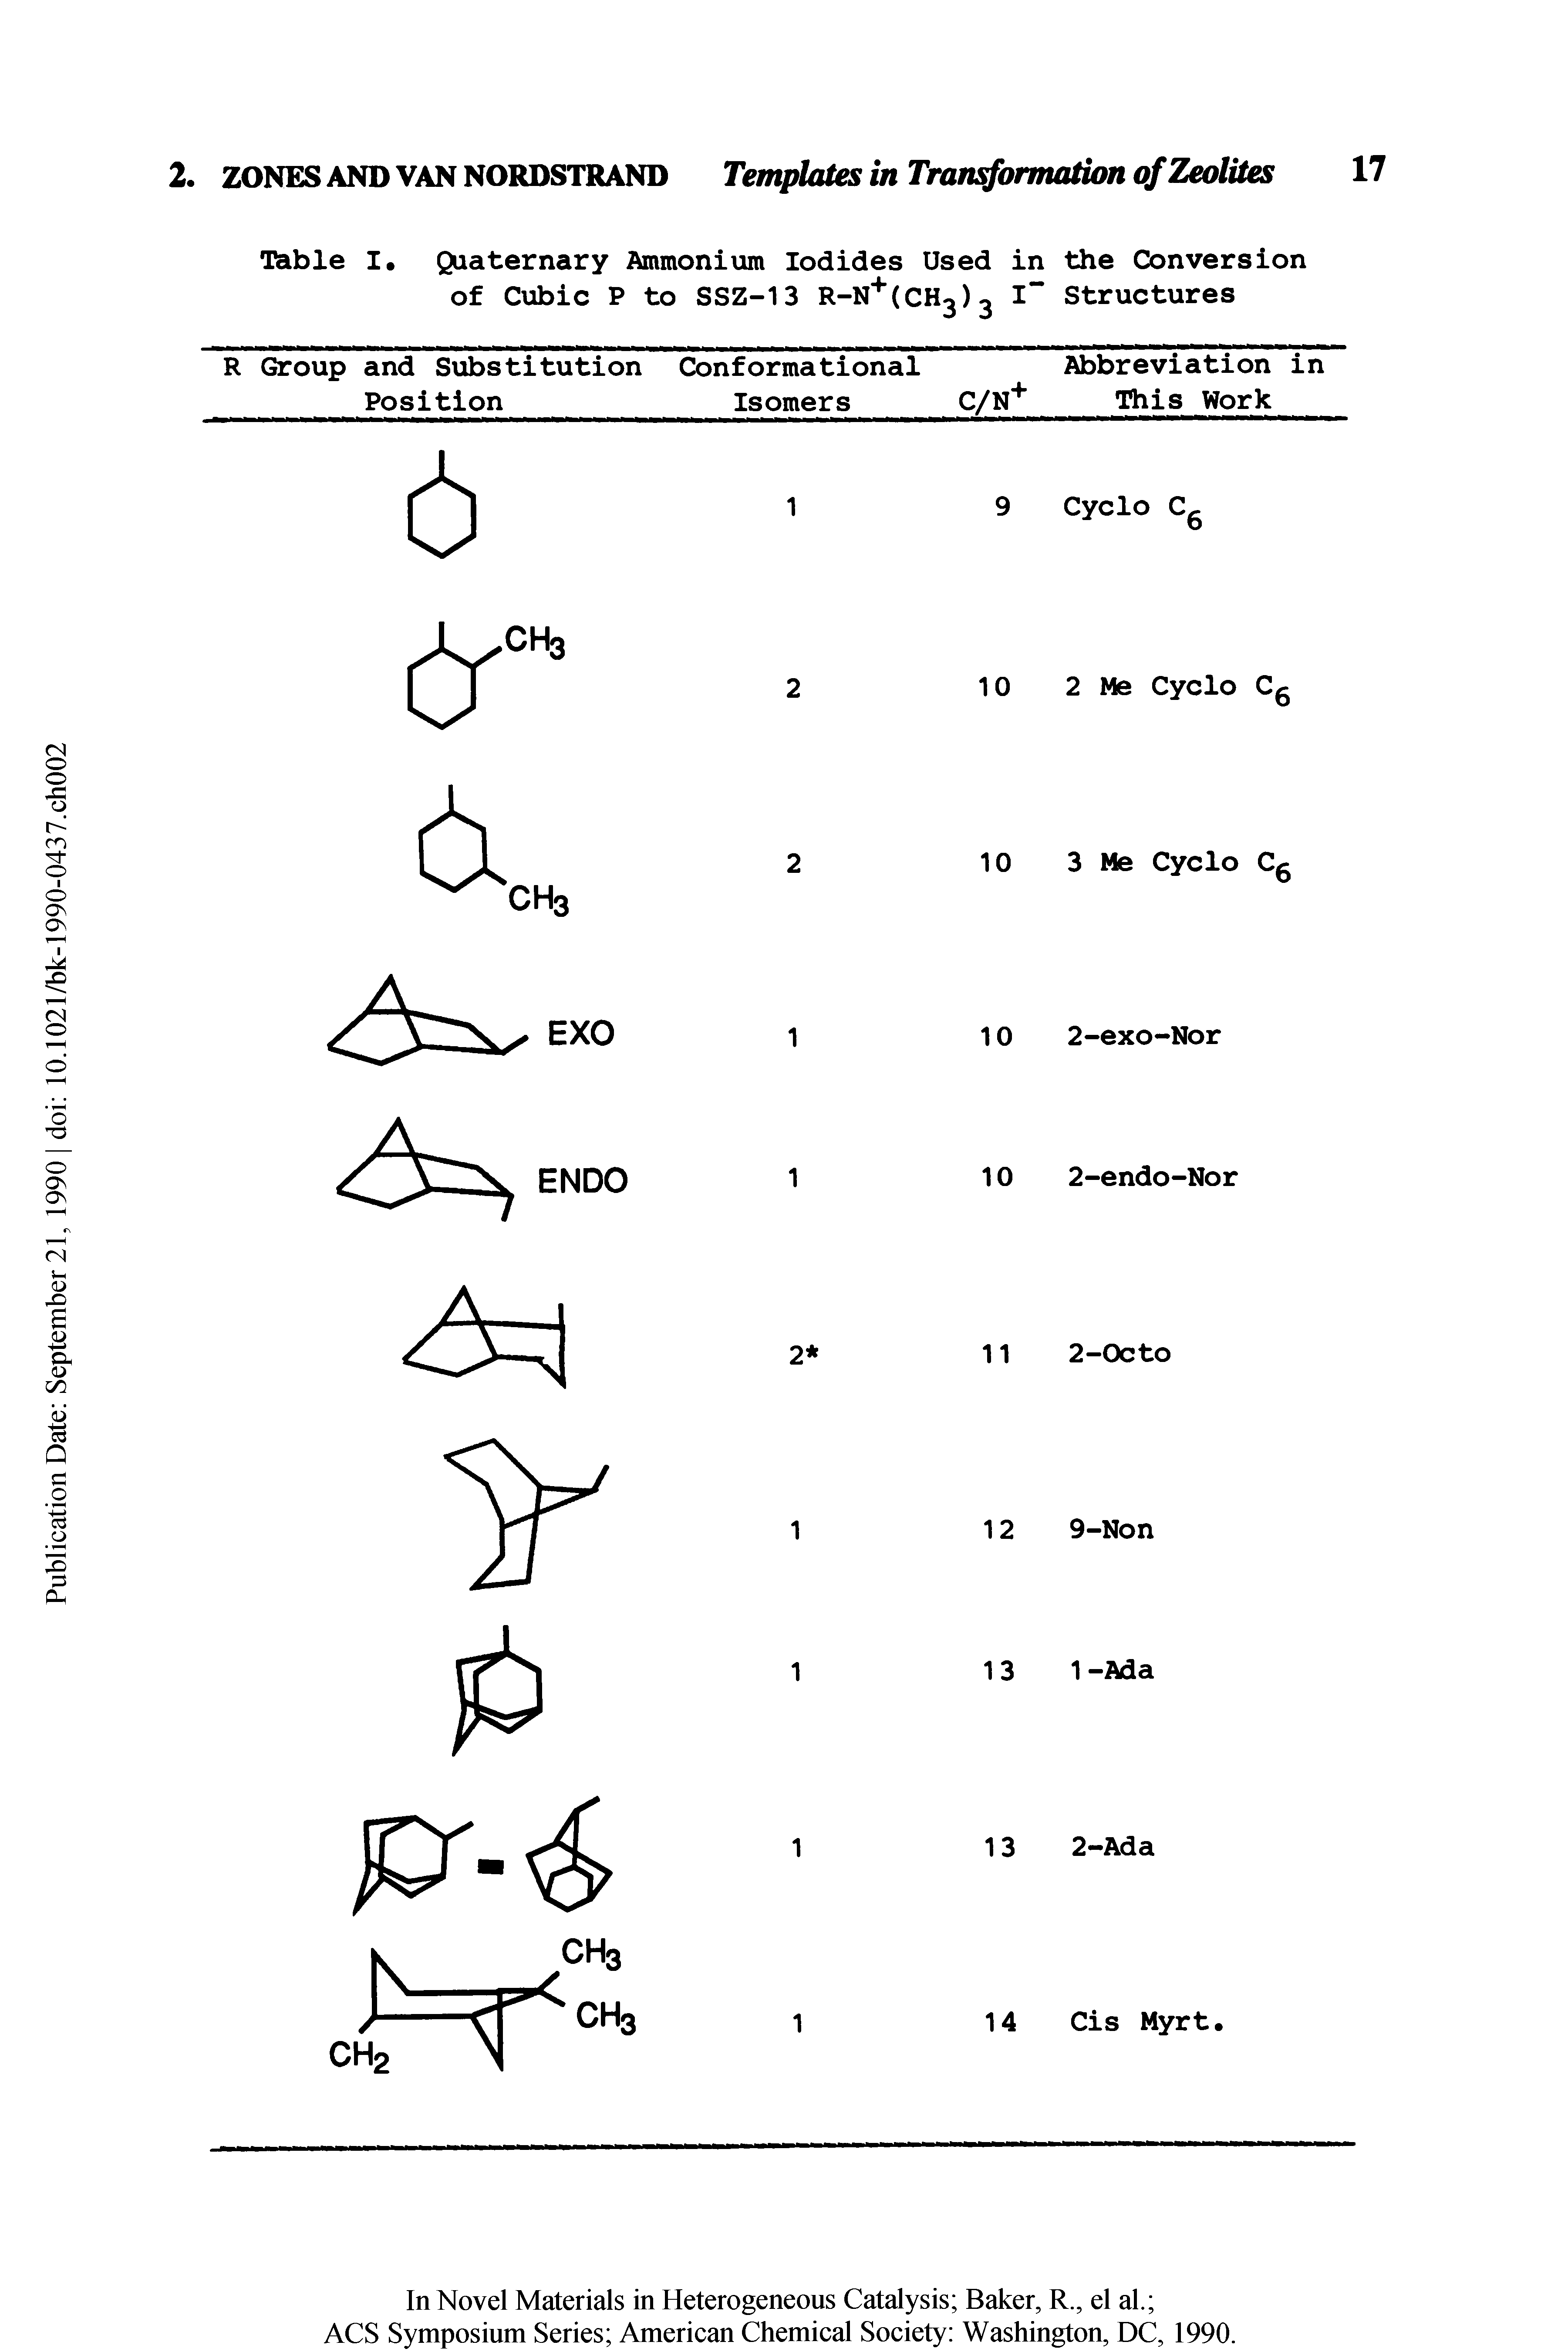 Table I. Quaternary Ammonium Iodides Used in the Conversion of Cubic P to SSZ-13 R-N (CH3)3 I Structures...